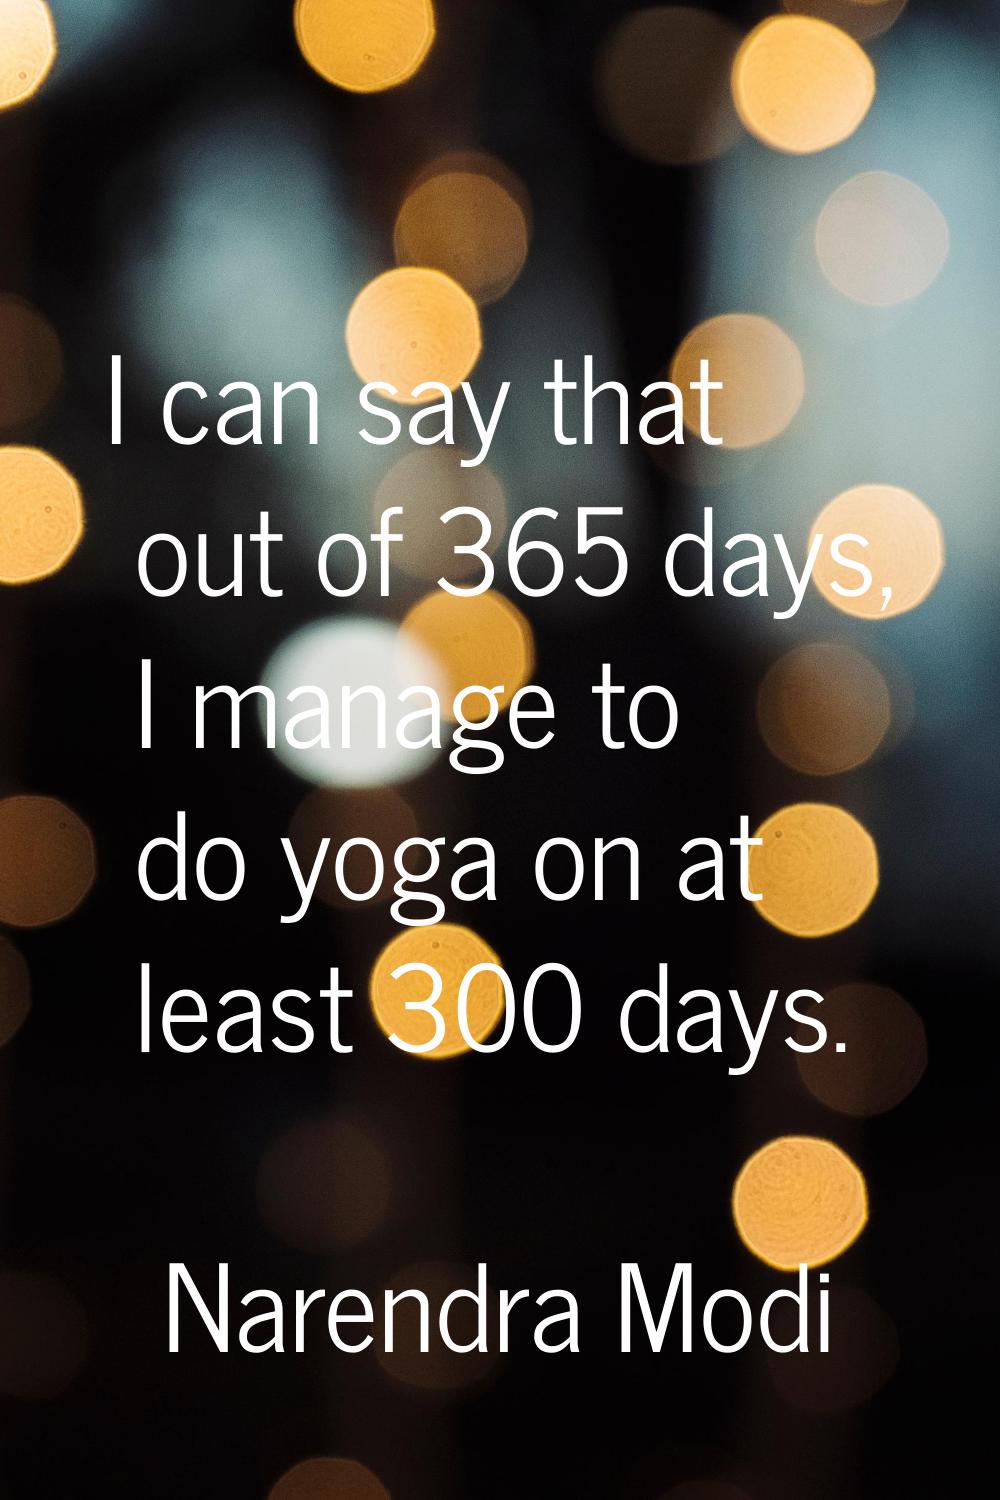 I can say that out of 365 days, I manage to do yoga on at least 300 days.